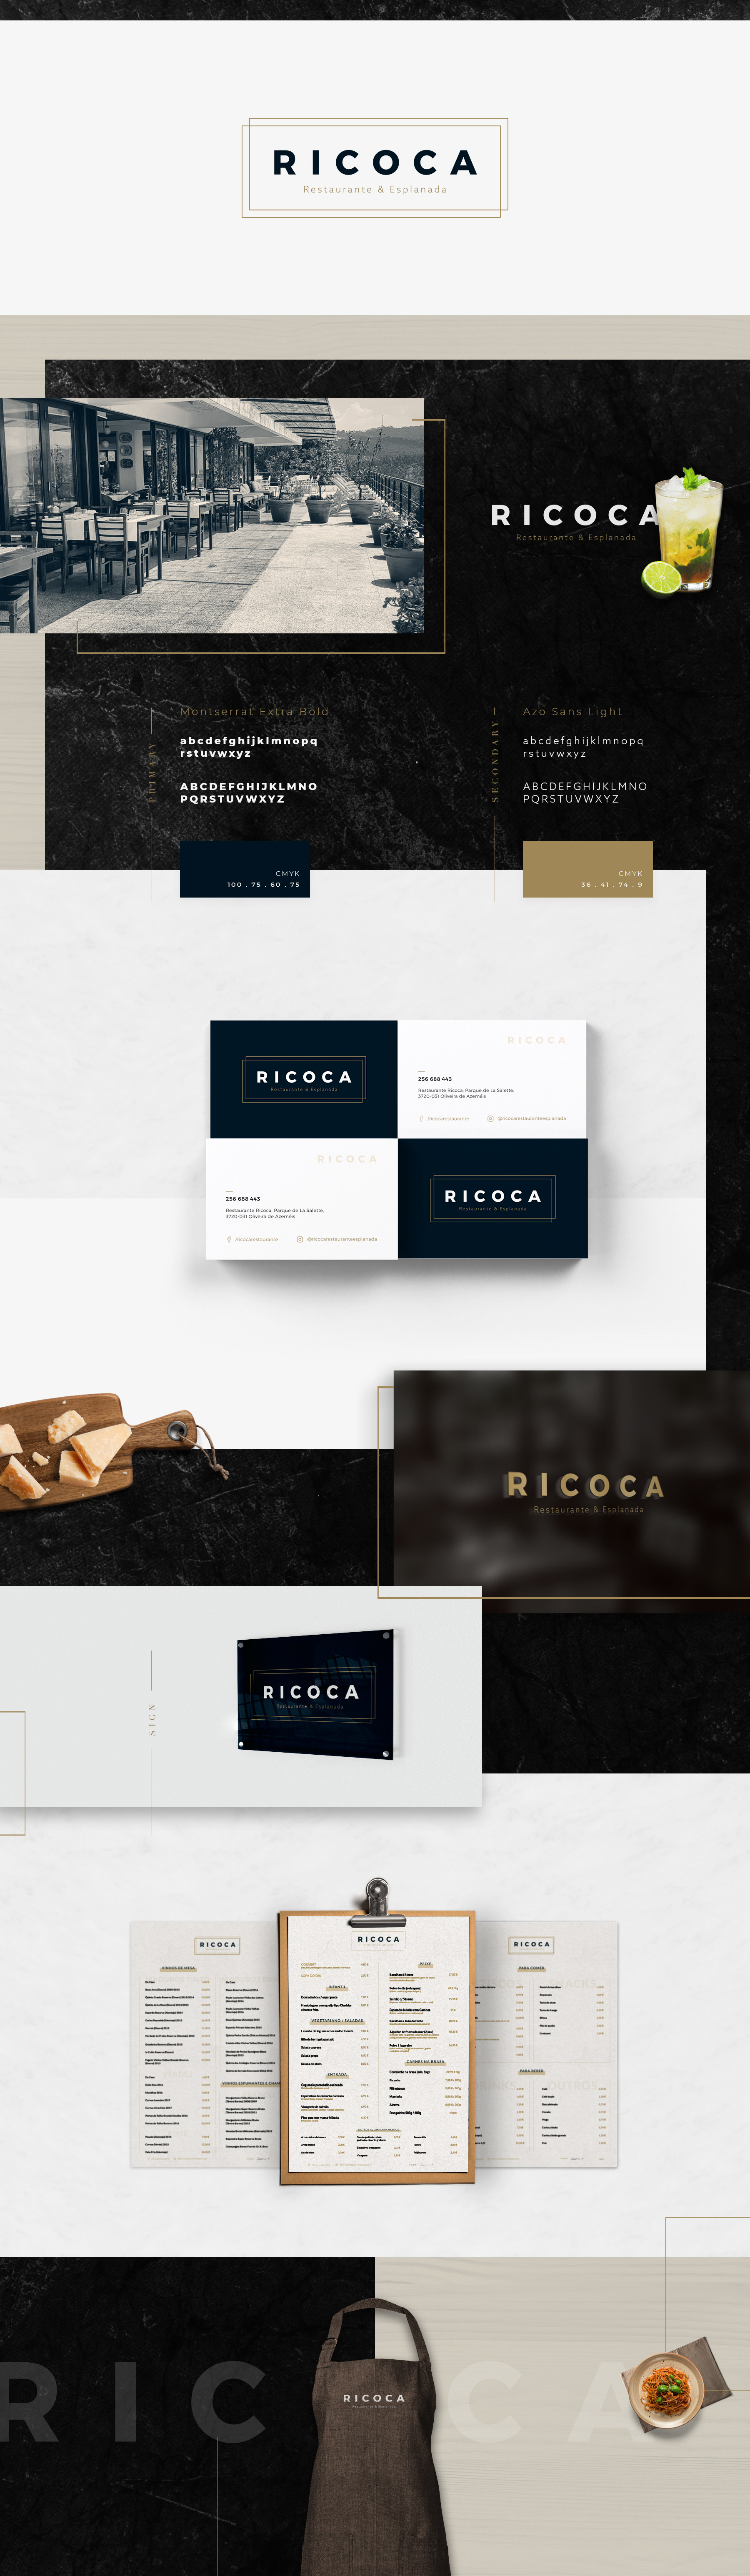 Restaurant and Balcony Bar branding and identity from portugal